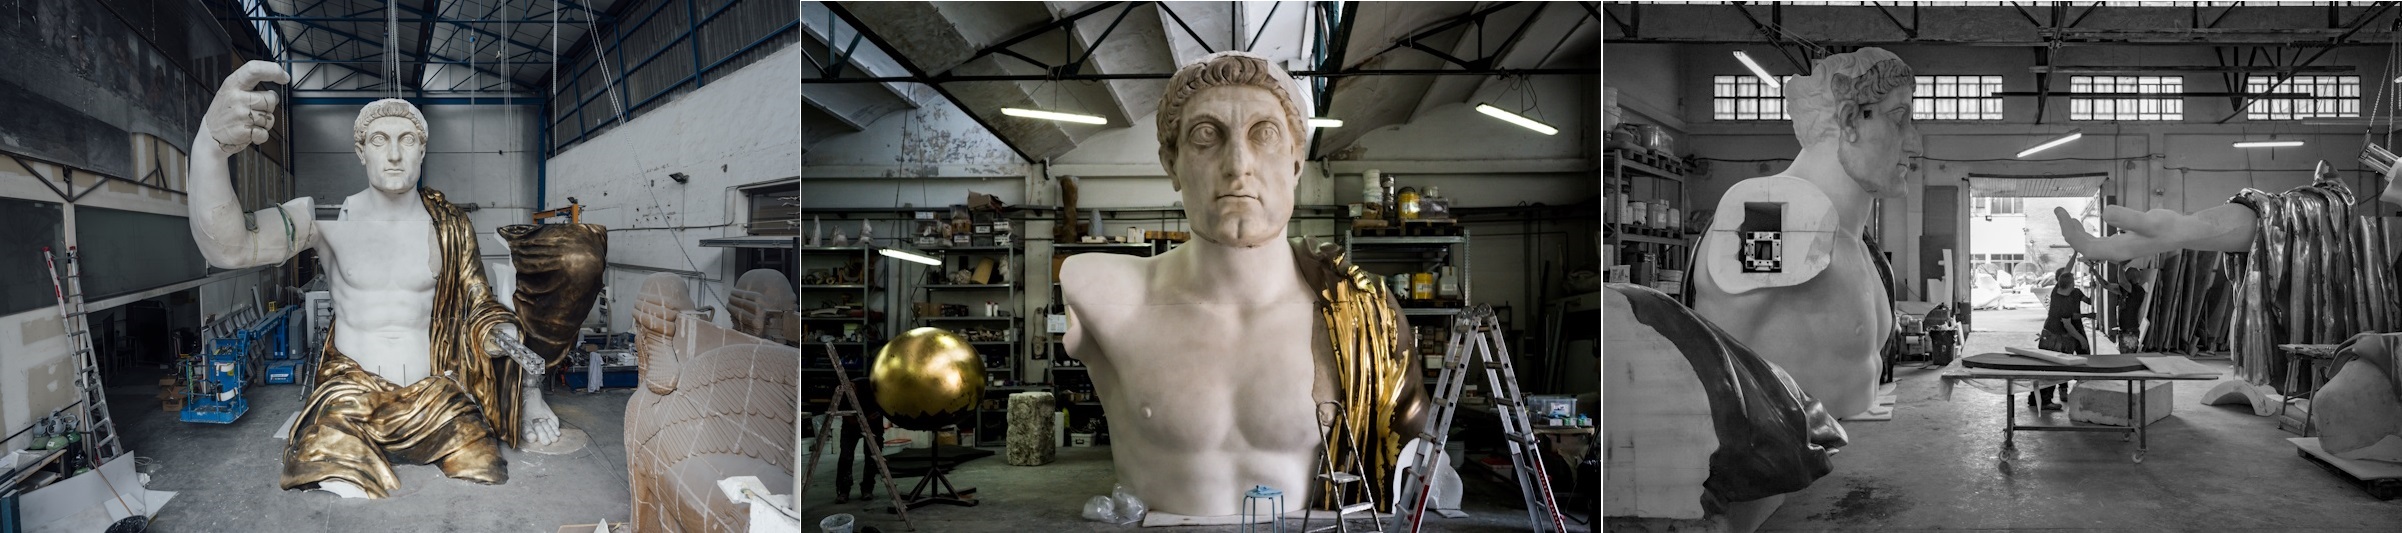 The Colossal Statue of Constantine: FREE Exhibition at the Capitoline Museums 6